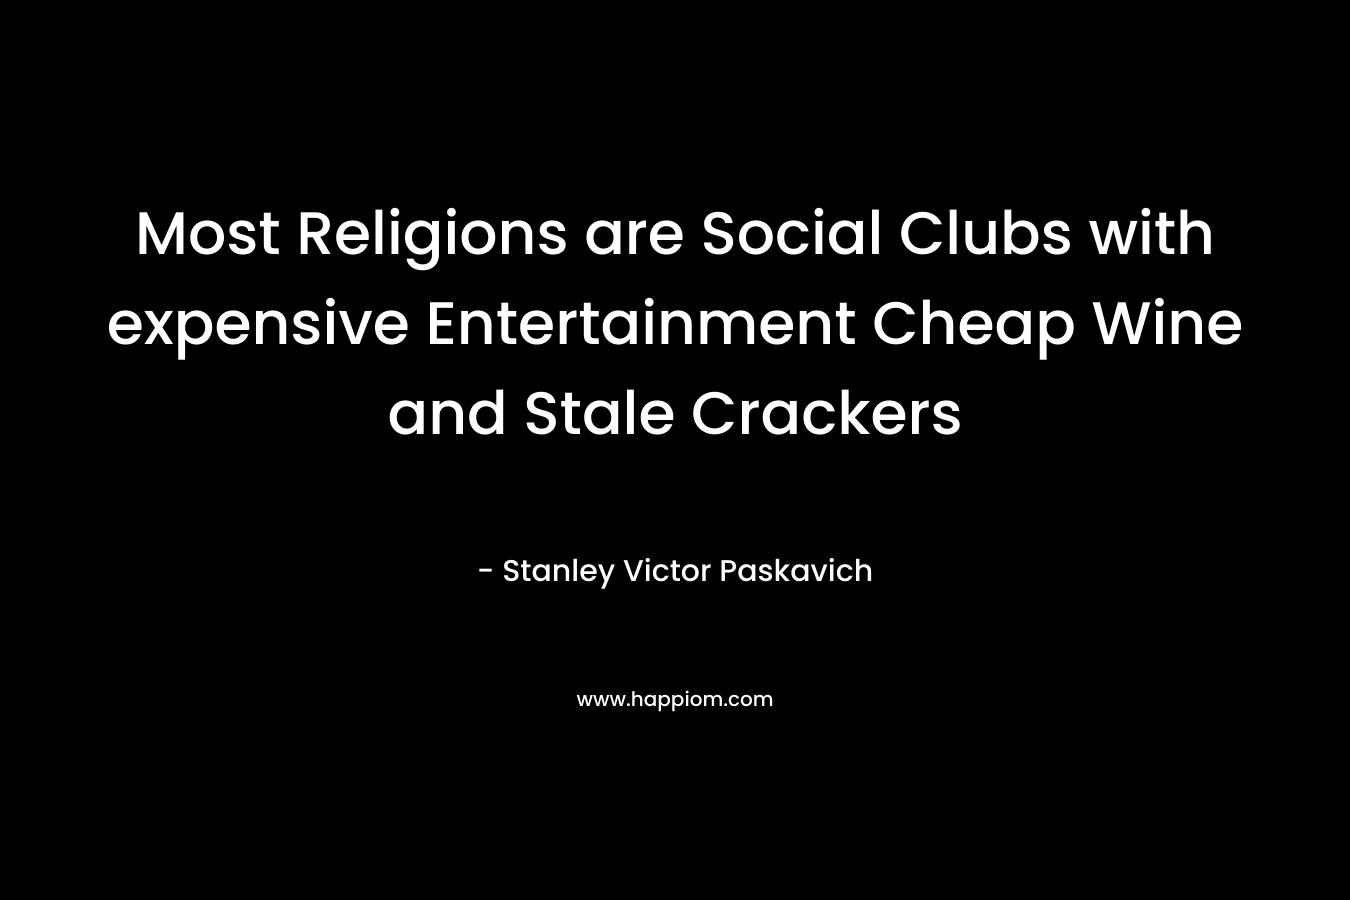 Most Religions are Social Clubs with expensive Entertainment Cheap Wine and Stale Crackers